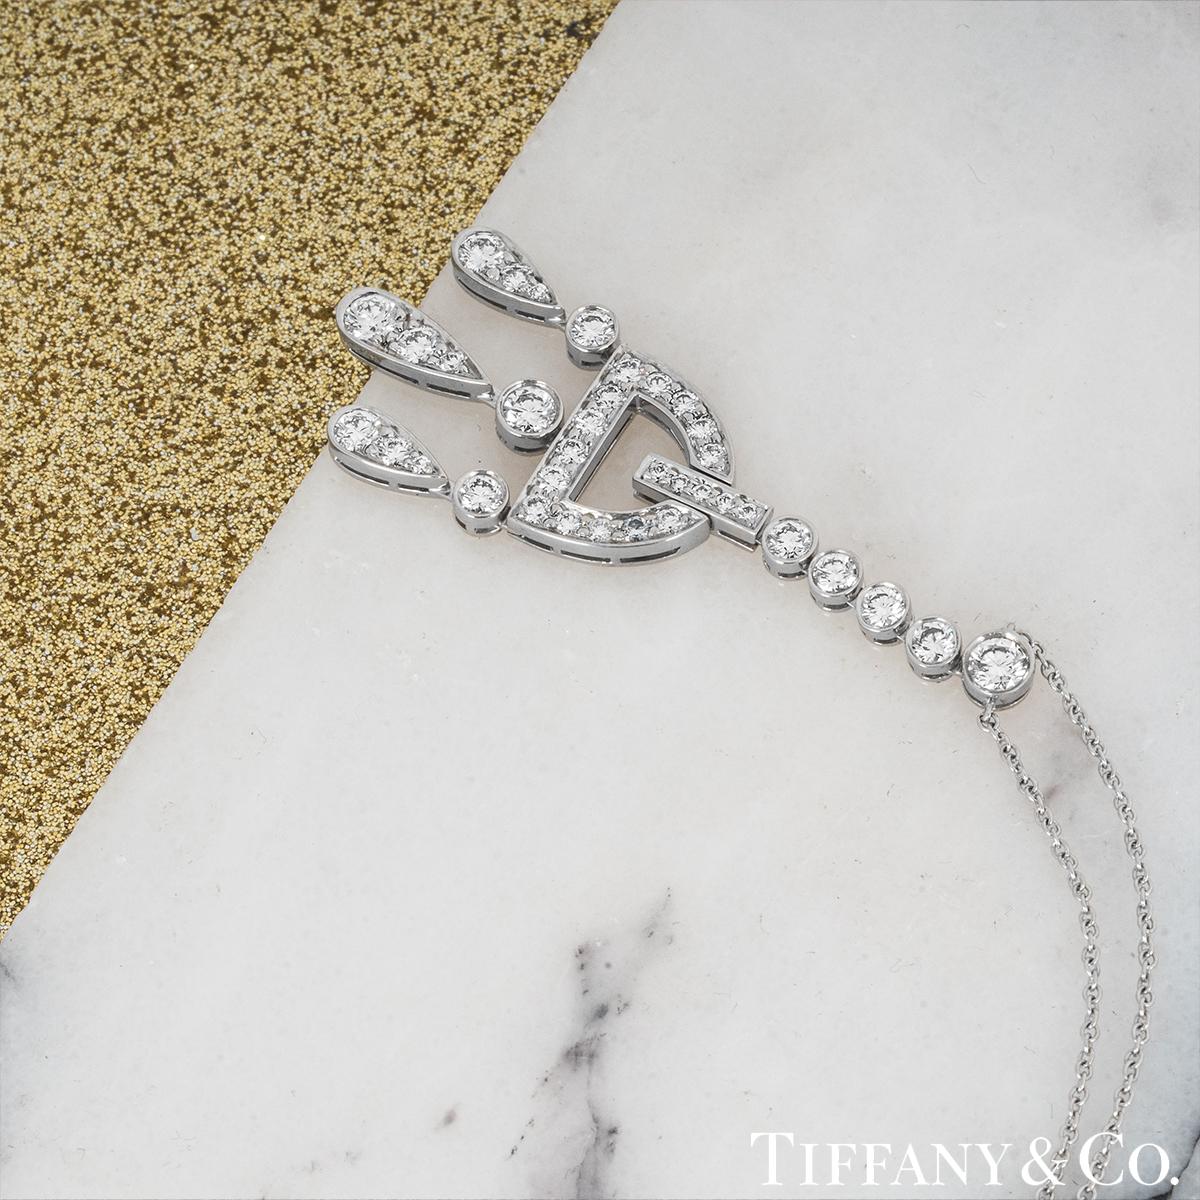 Tiffany & Co. Platinum Jazz Buckle Diamond Pendant Necklace 1.46 Carat In Excellent Condition For Sale In London, GB